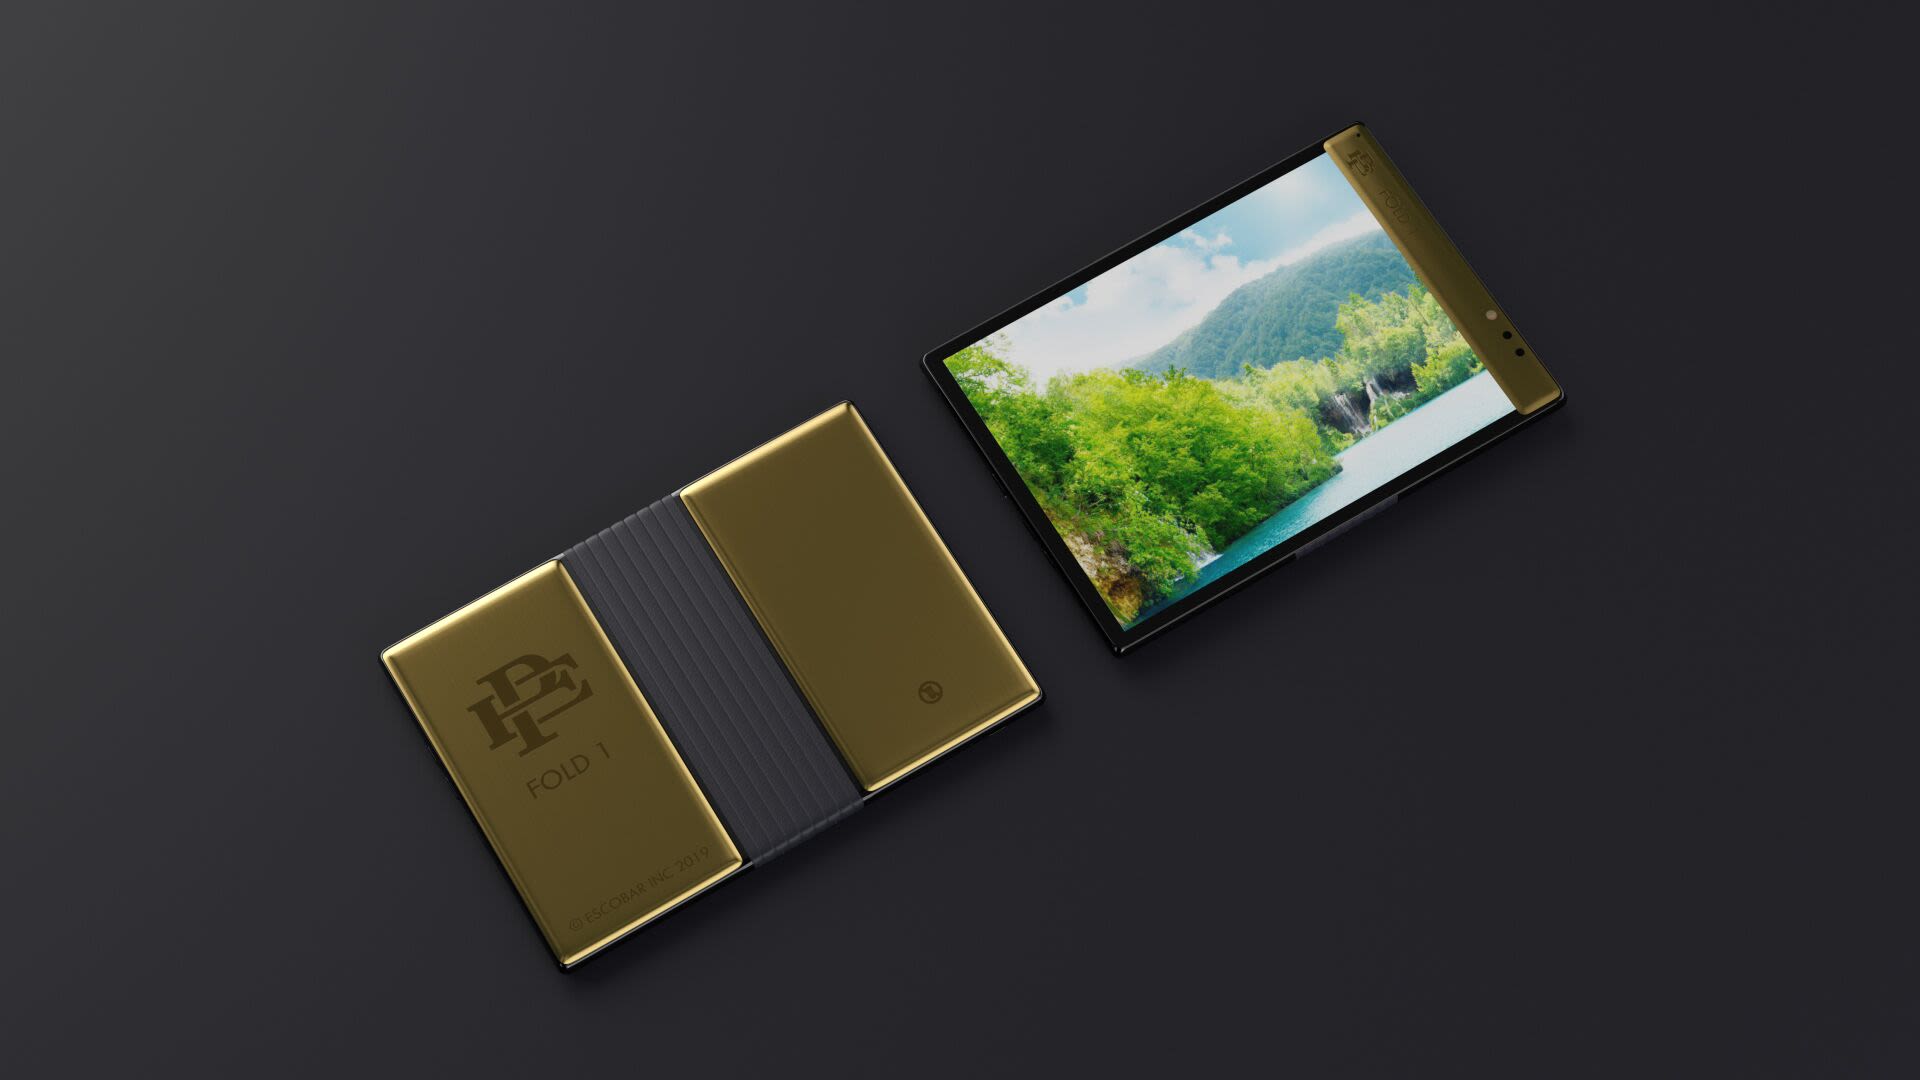 Pablo Escobar's brother released a foldable smartphone that claims can only be destroyed by fire | CNN Business